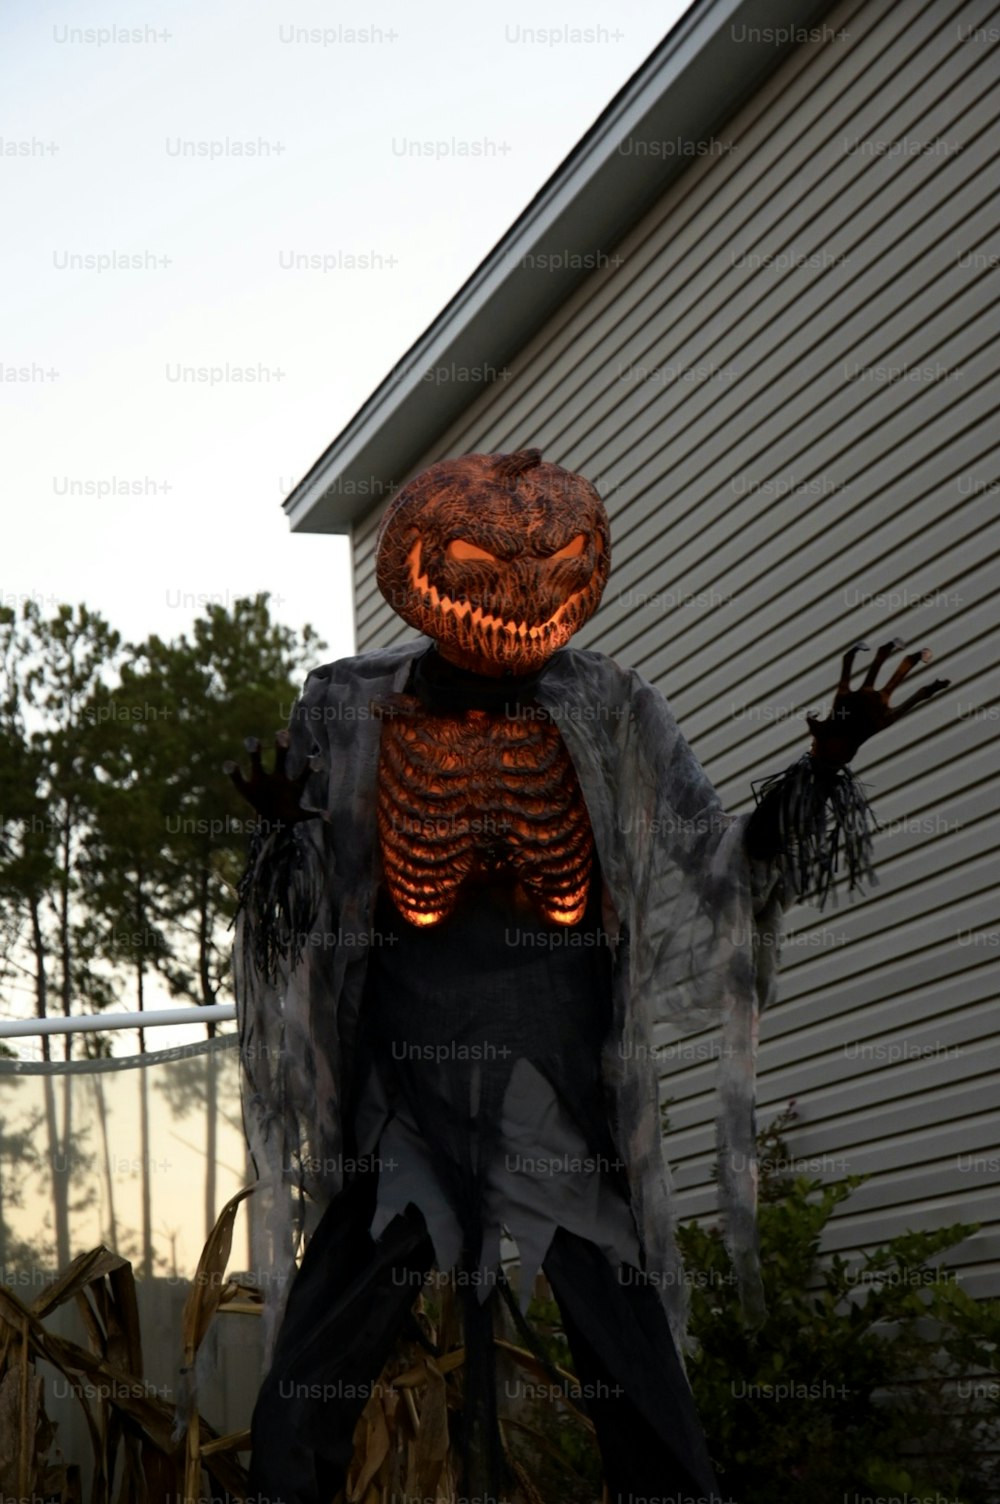 a lighted scarecrow in a yard with a house in the background